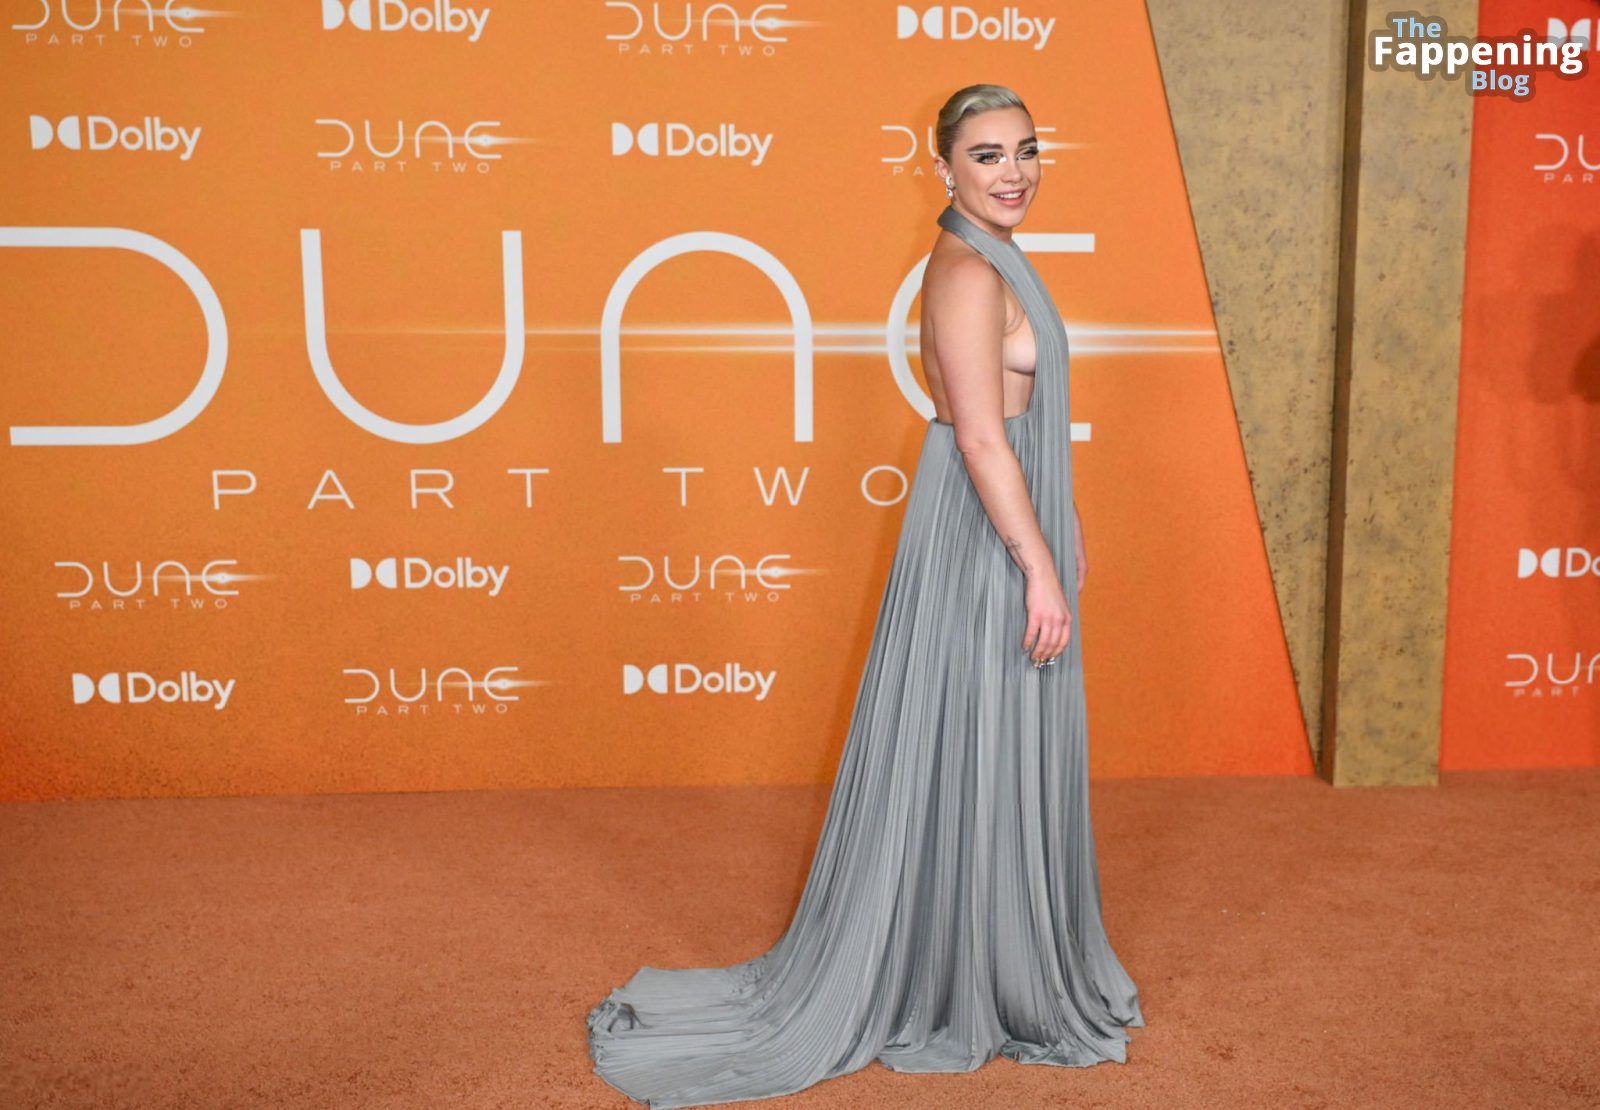 florence-pugh-braless-side-boobs-dune-part-two-premiere-nyc-22-thefappeningblog.com_.jpg